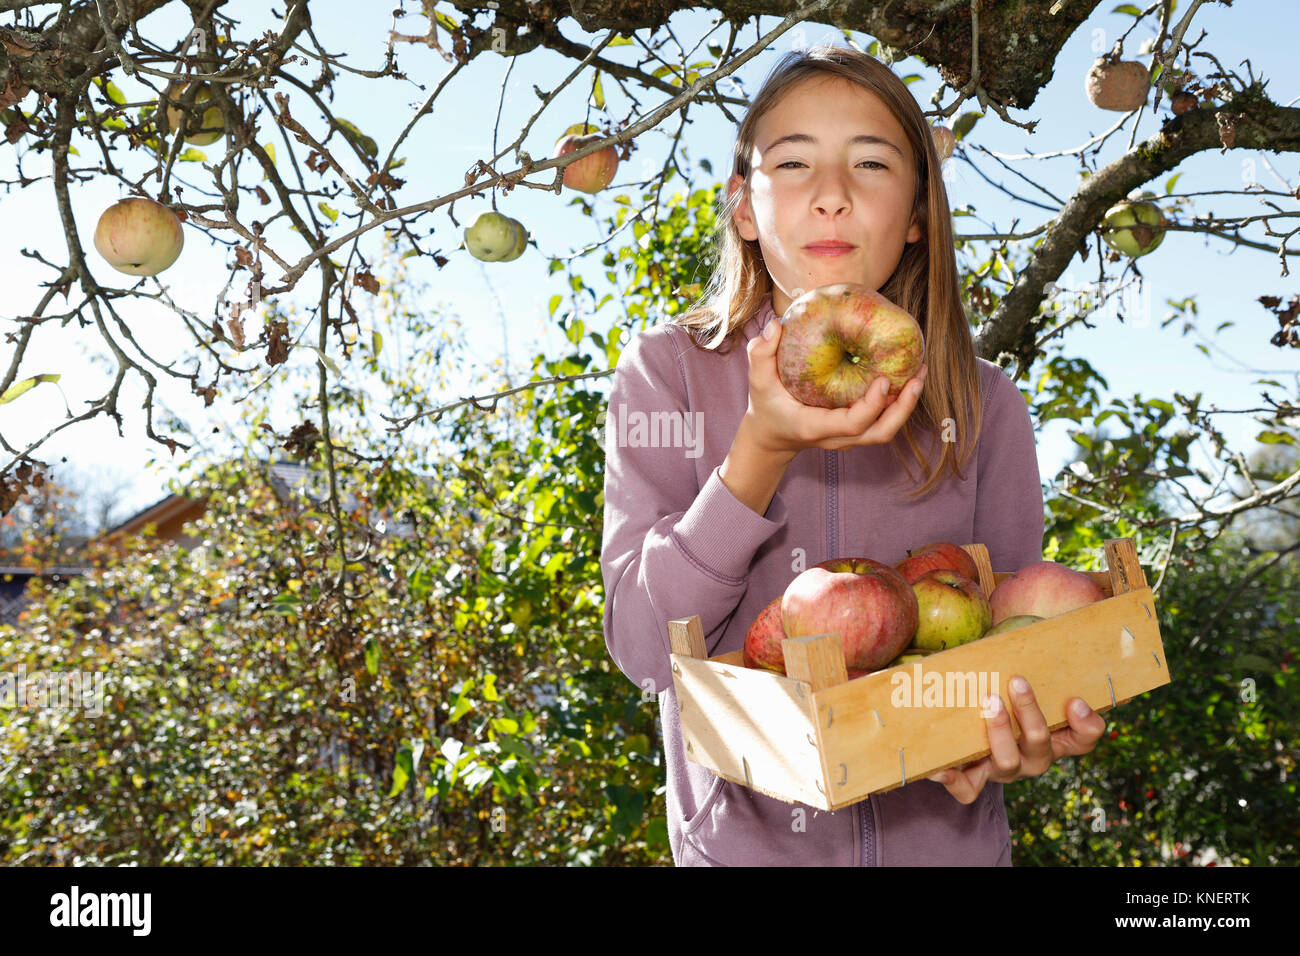 Young girl holding box of freshly picked apples Stock Photo